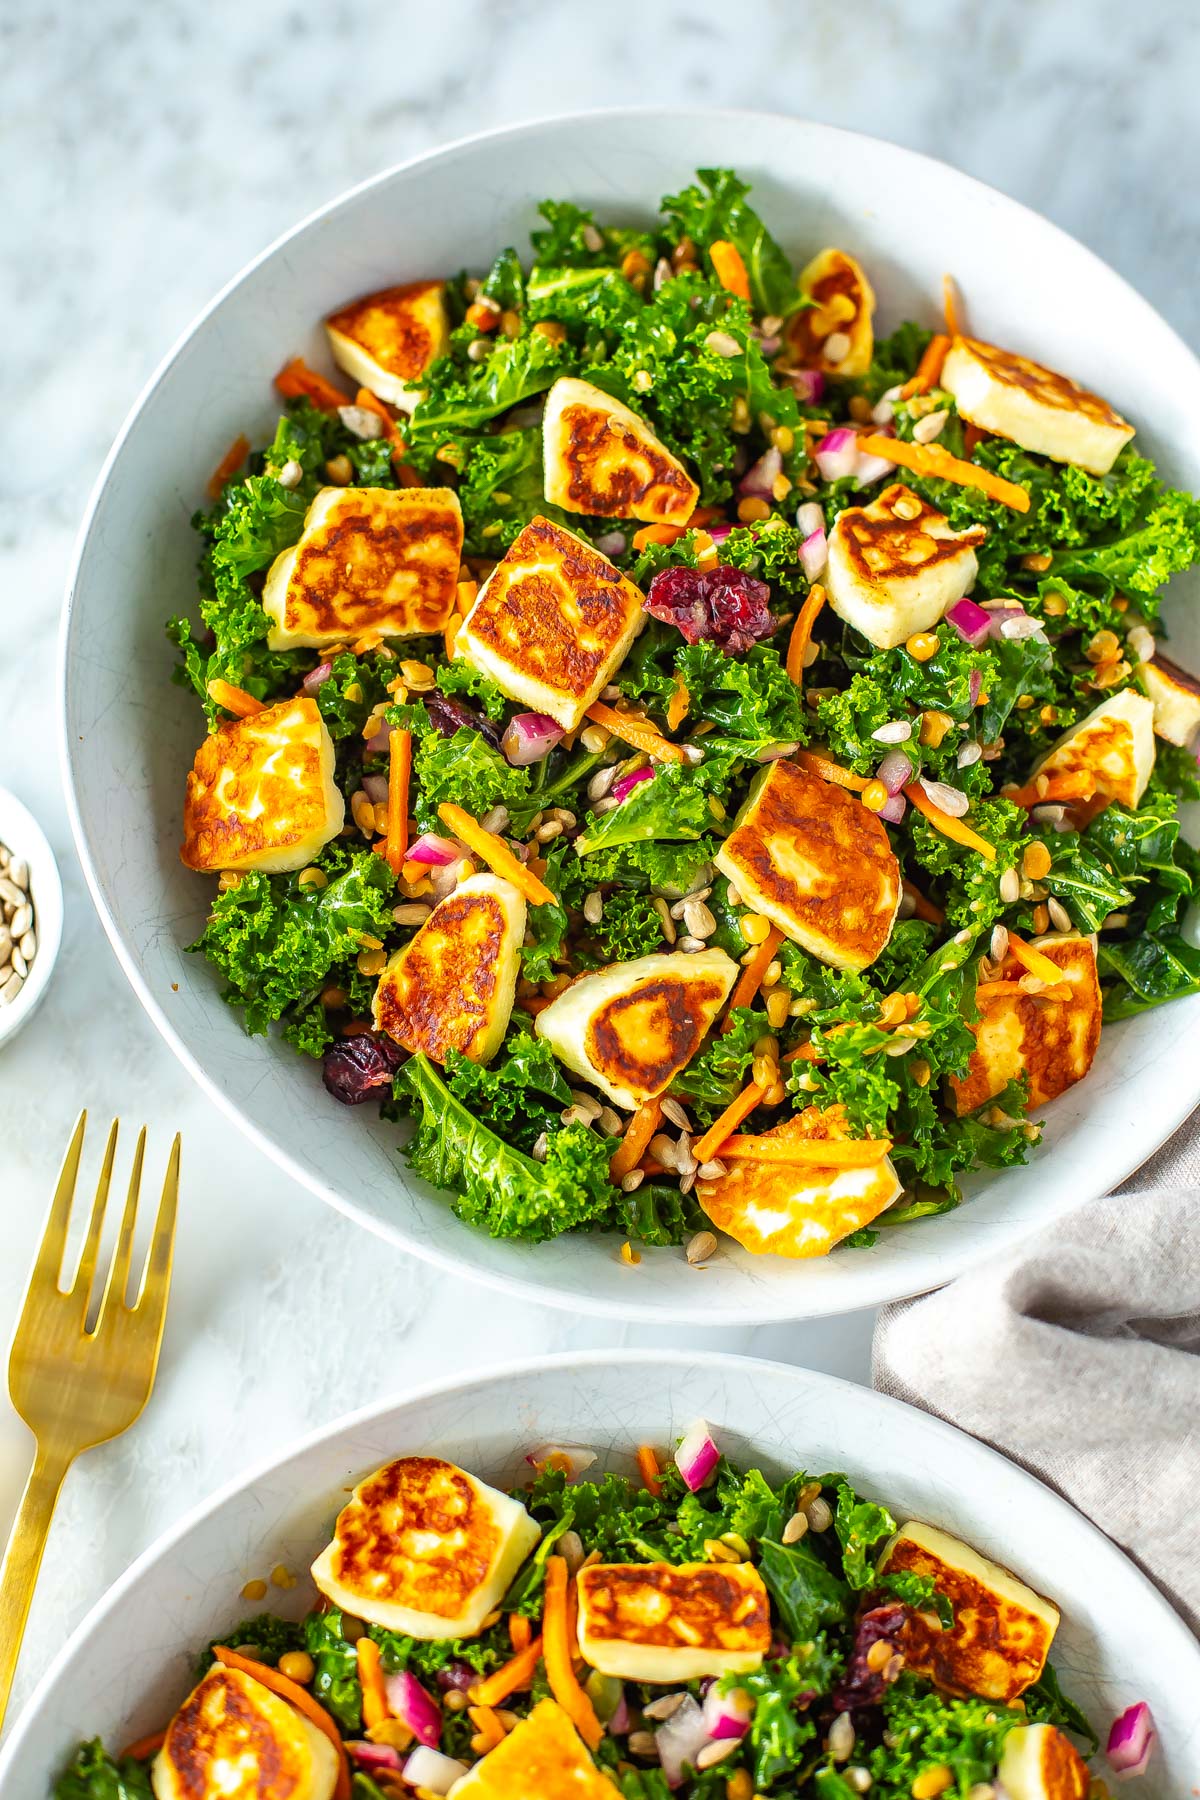 A close-up of a bowl of kale salad topped with halloumi cheese.